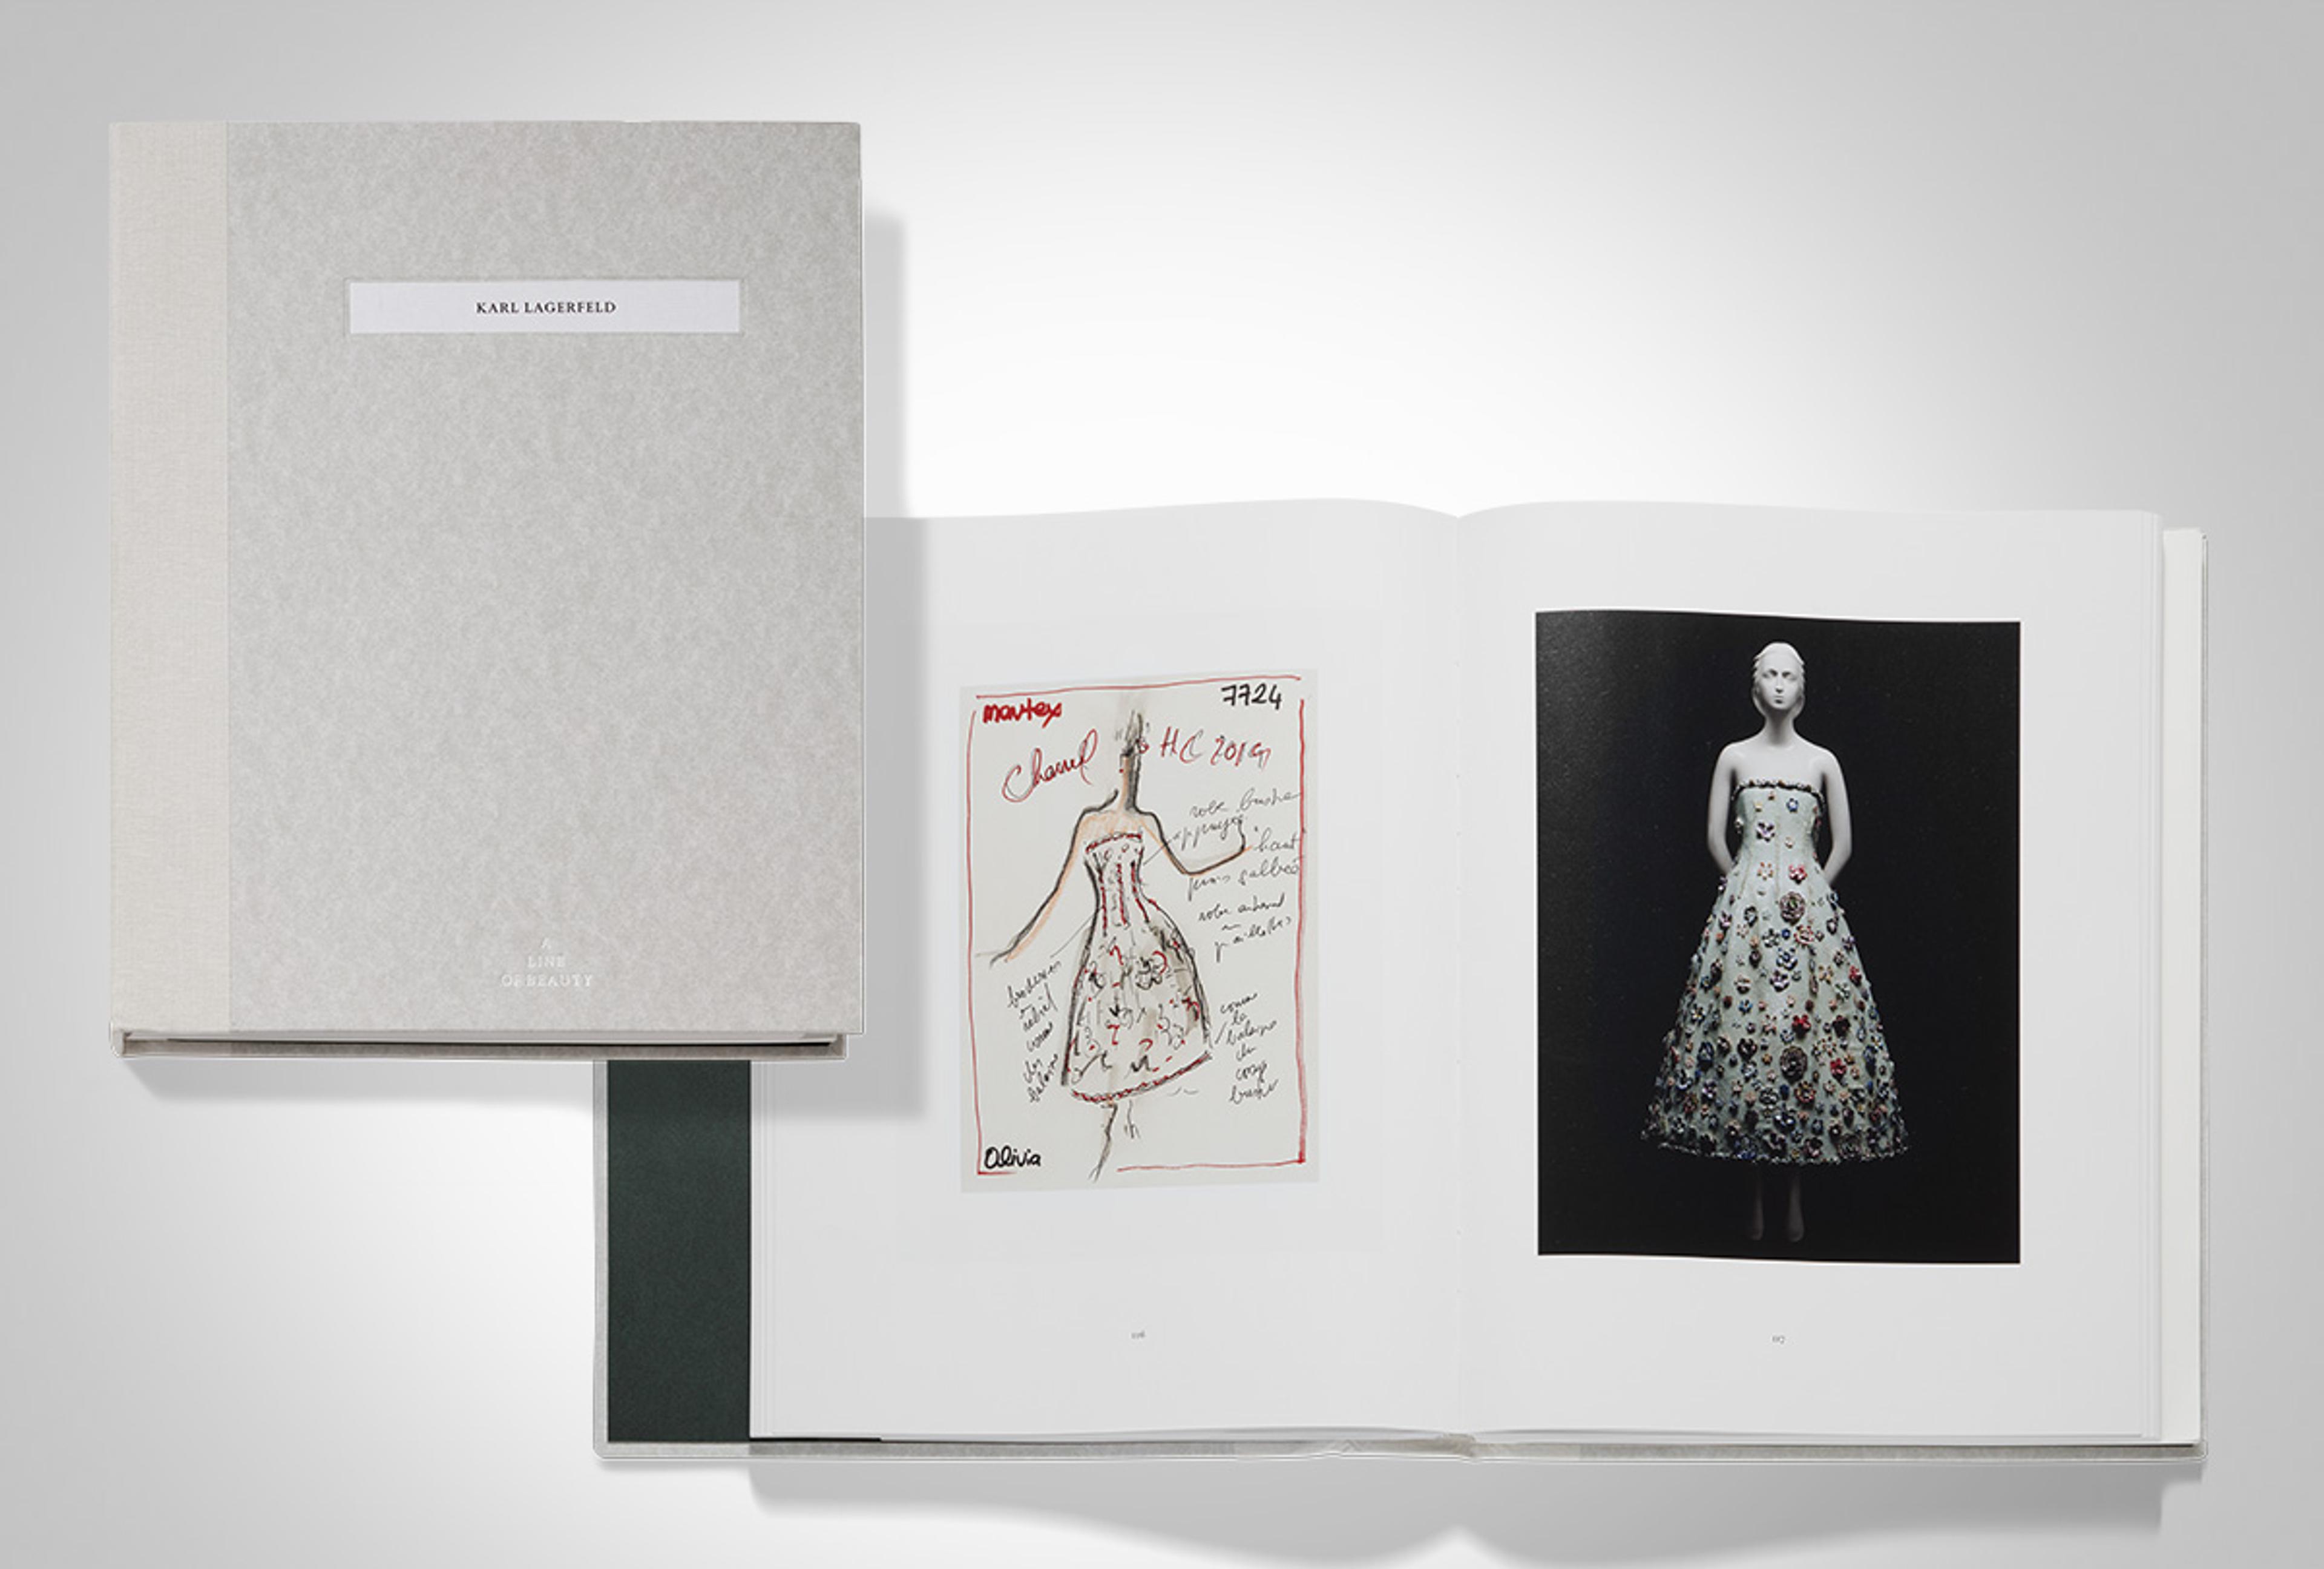 Two catalogues, one open and one closed, for "Karl Lagerfeld: A Line of Beauty." The open catalogue features a sketch and a garment photo side by side.